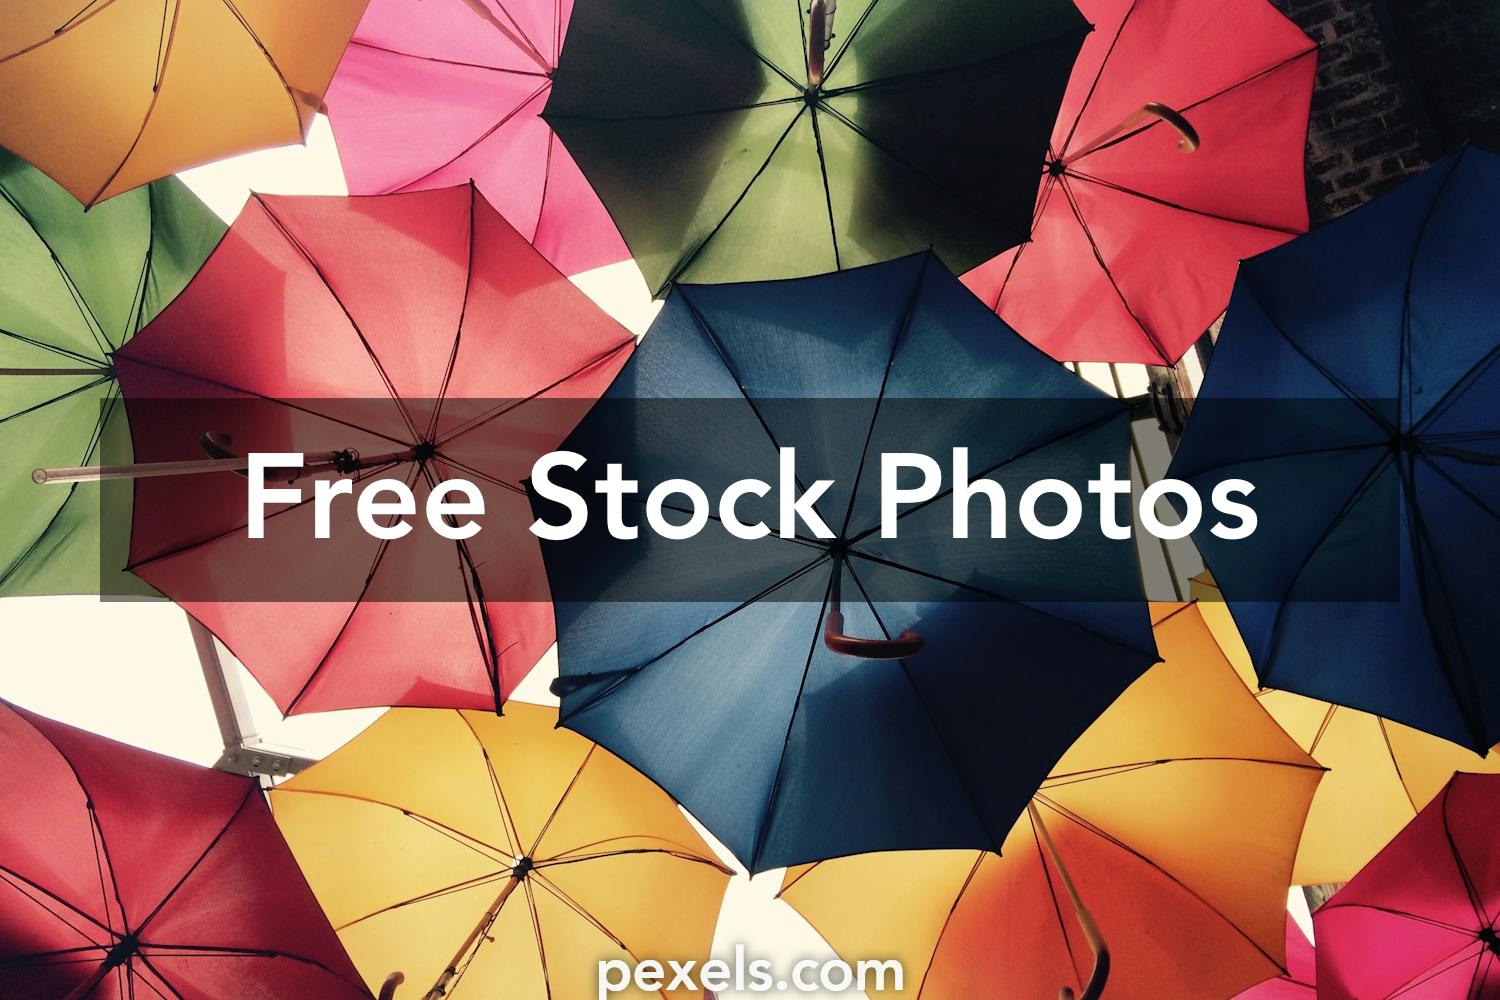 4 000 Best Facebook Cover Photos 100 Free Download Pexels Stock Photos Don't fall behind and make your own cover photo for fb. 4 000 best facebook cover photos 100